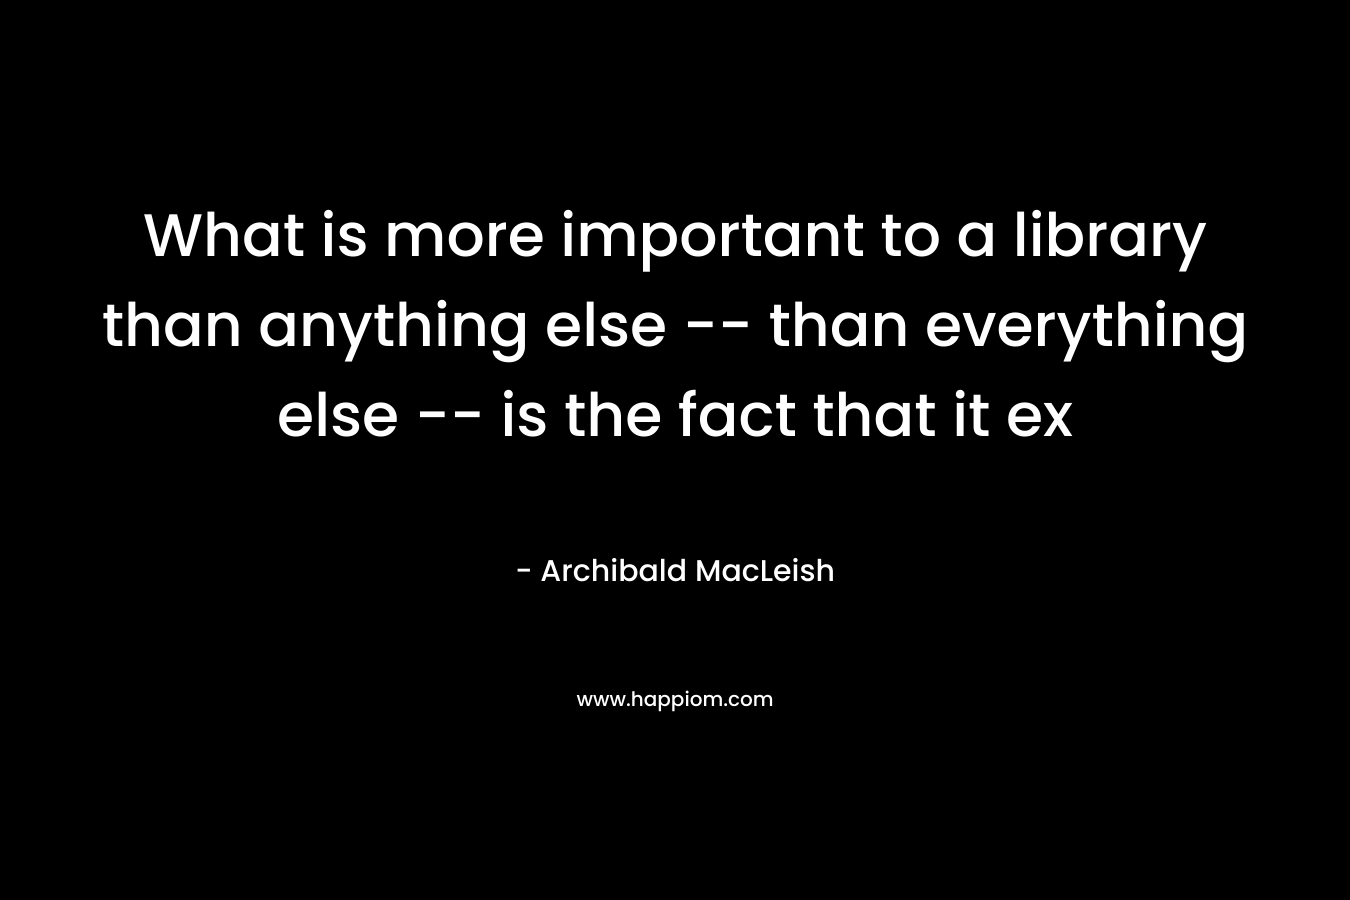 What is more important to a library than anything else -- than everything else -- is the fact that it ex